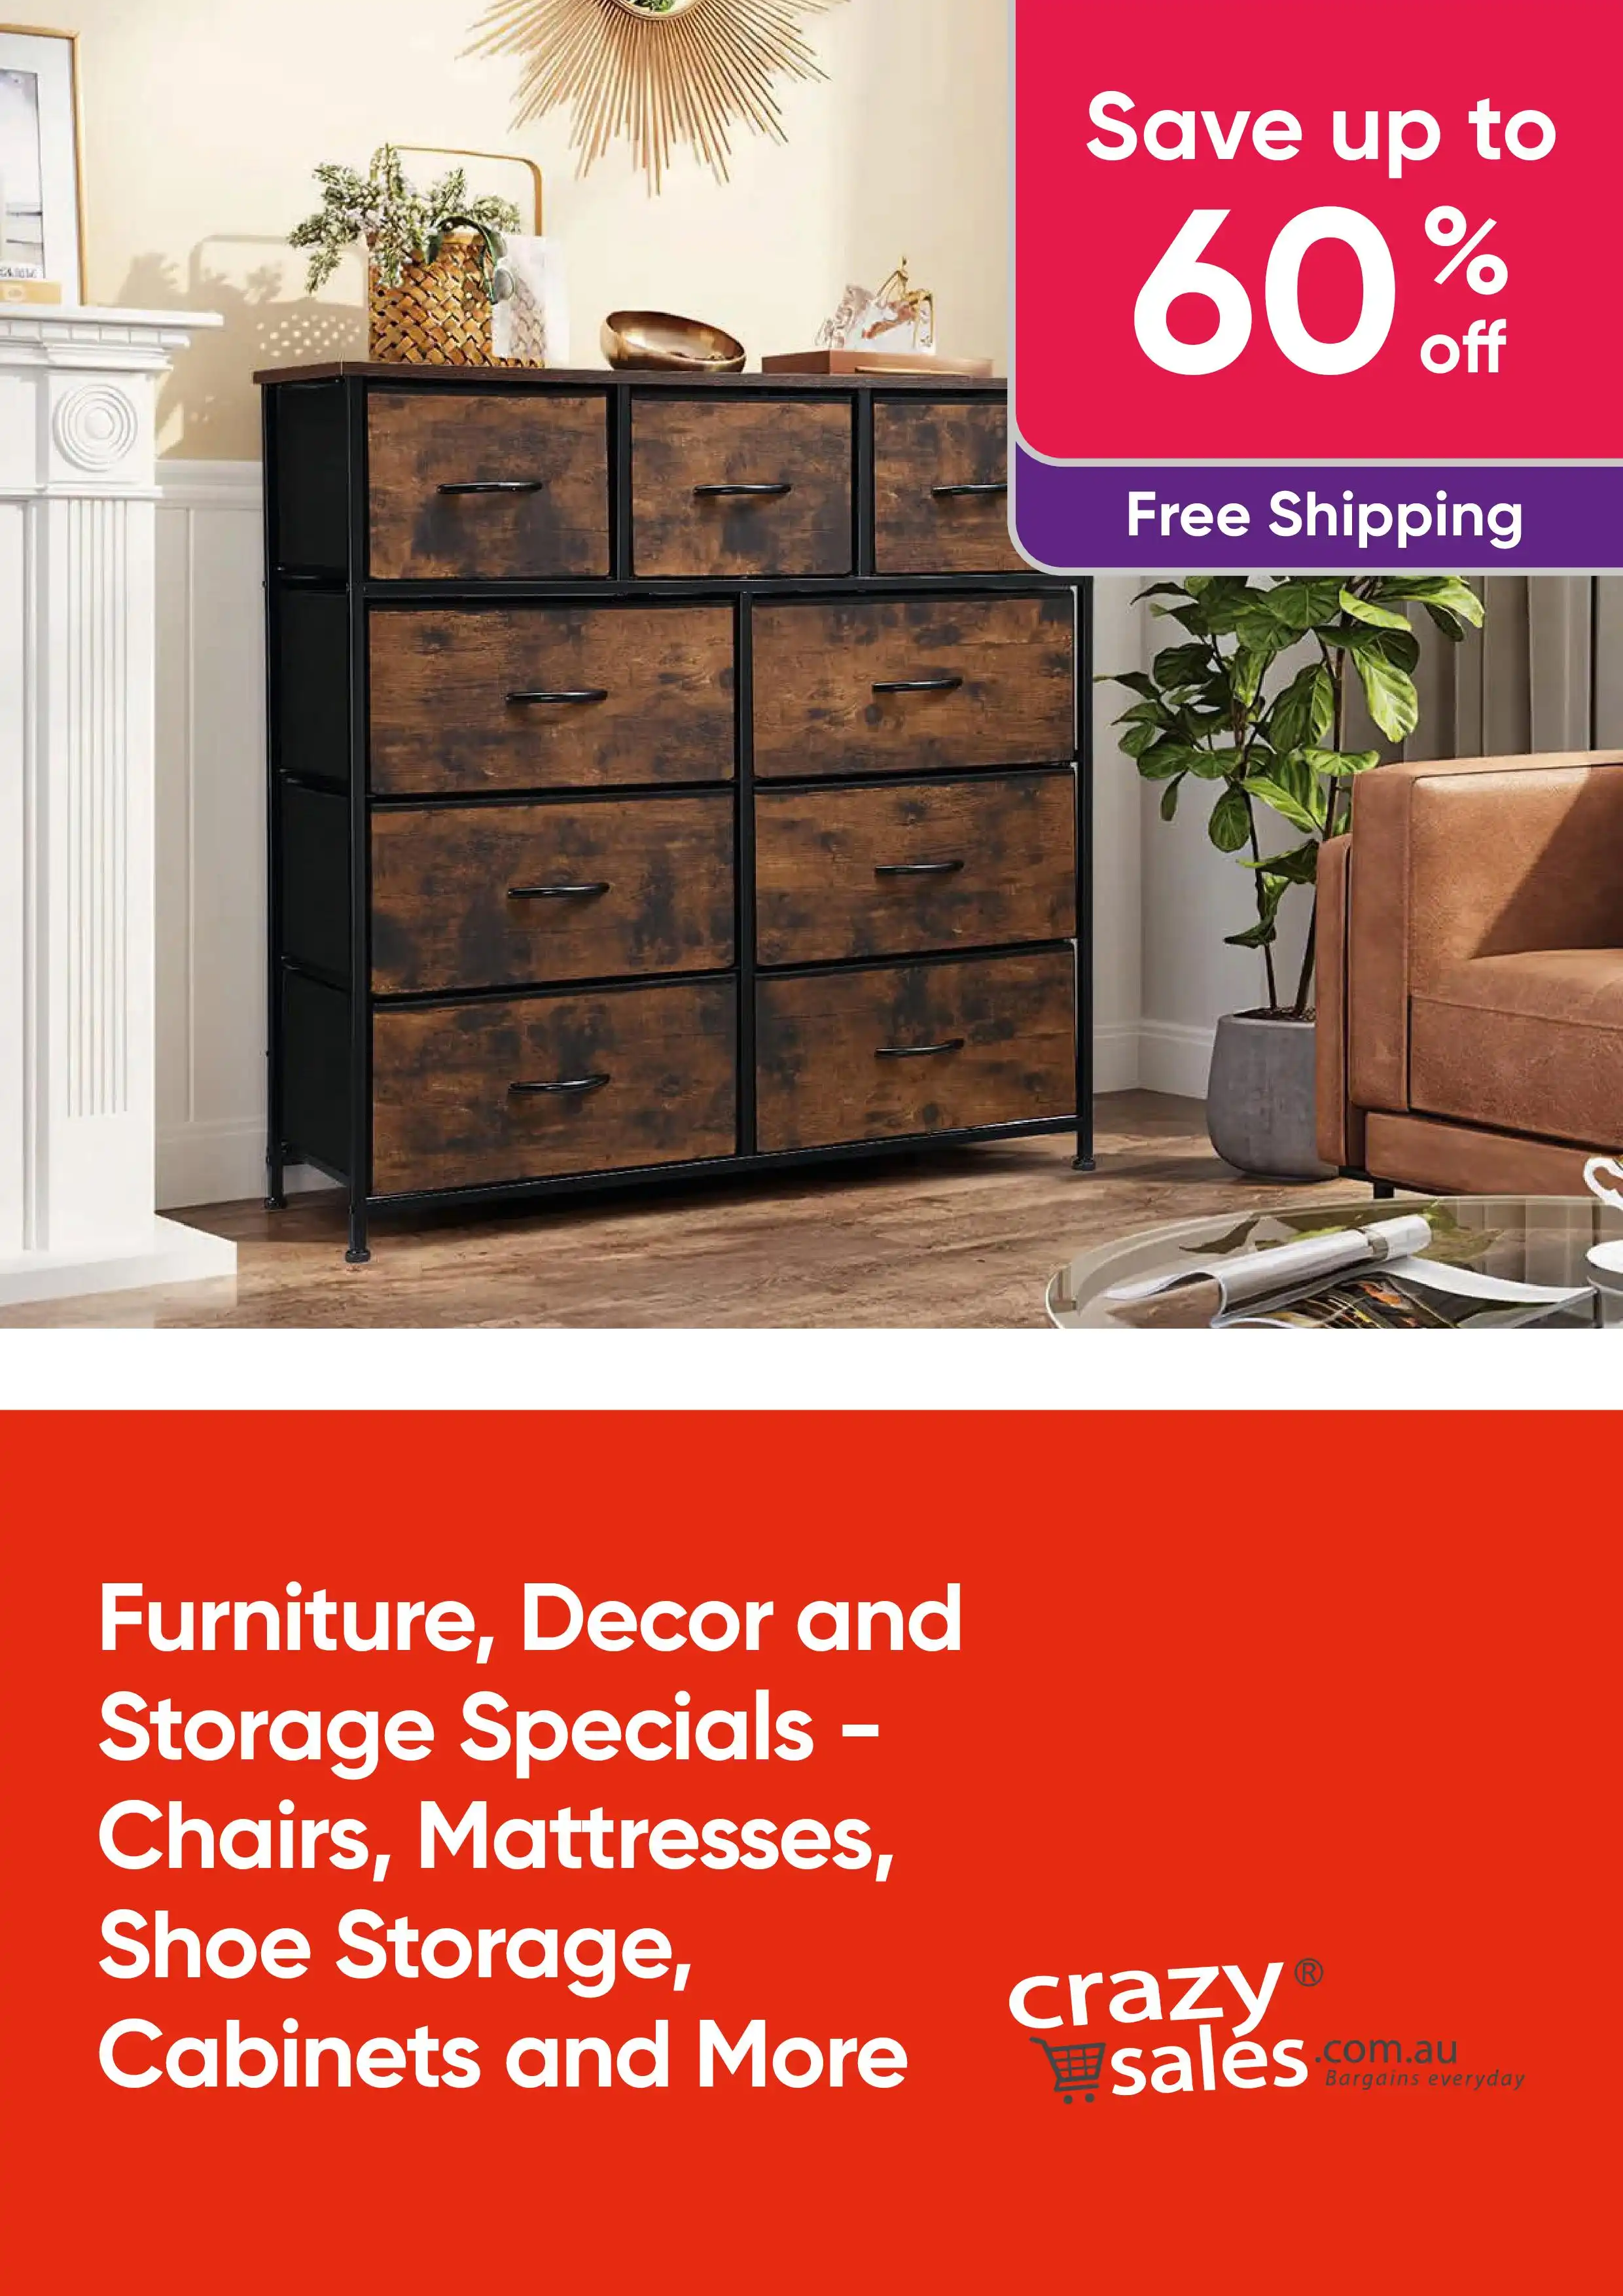 Shop Furniture, Decor and Storage Specials - Save Up to 60% Off Chair, Mattresses, Cabinet and More